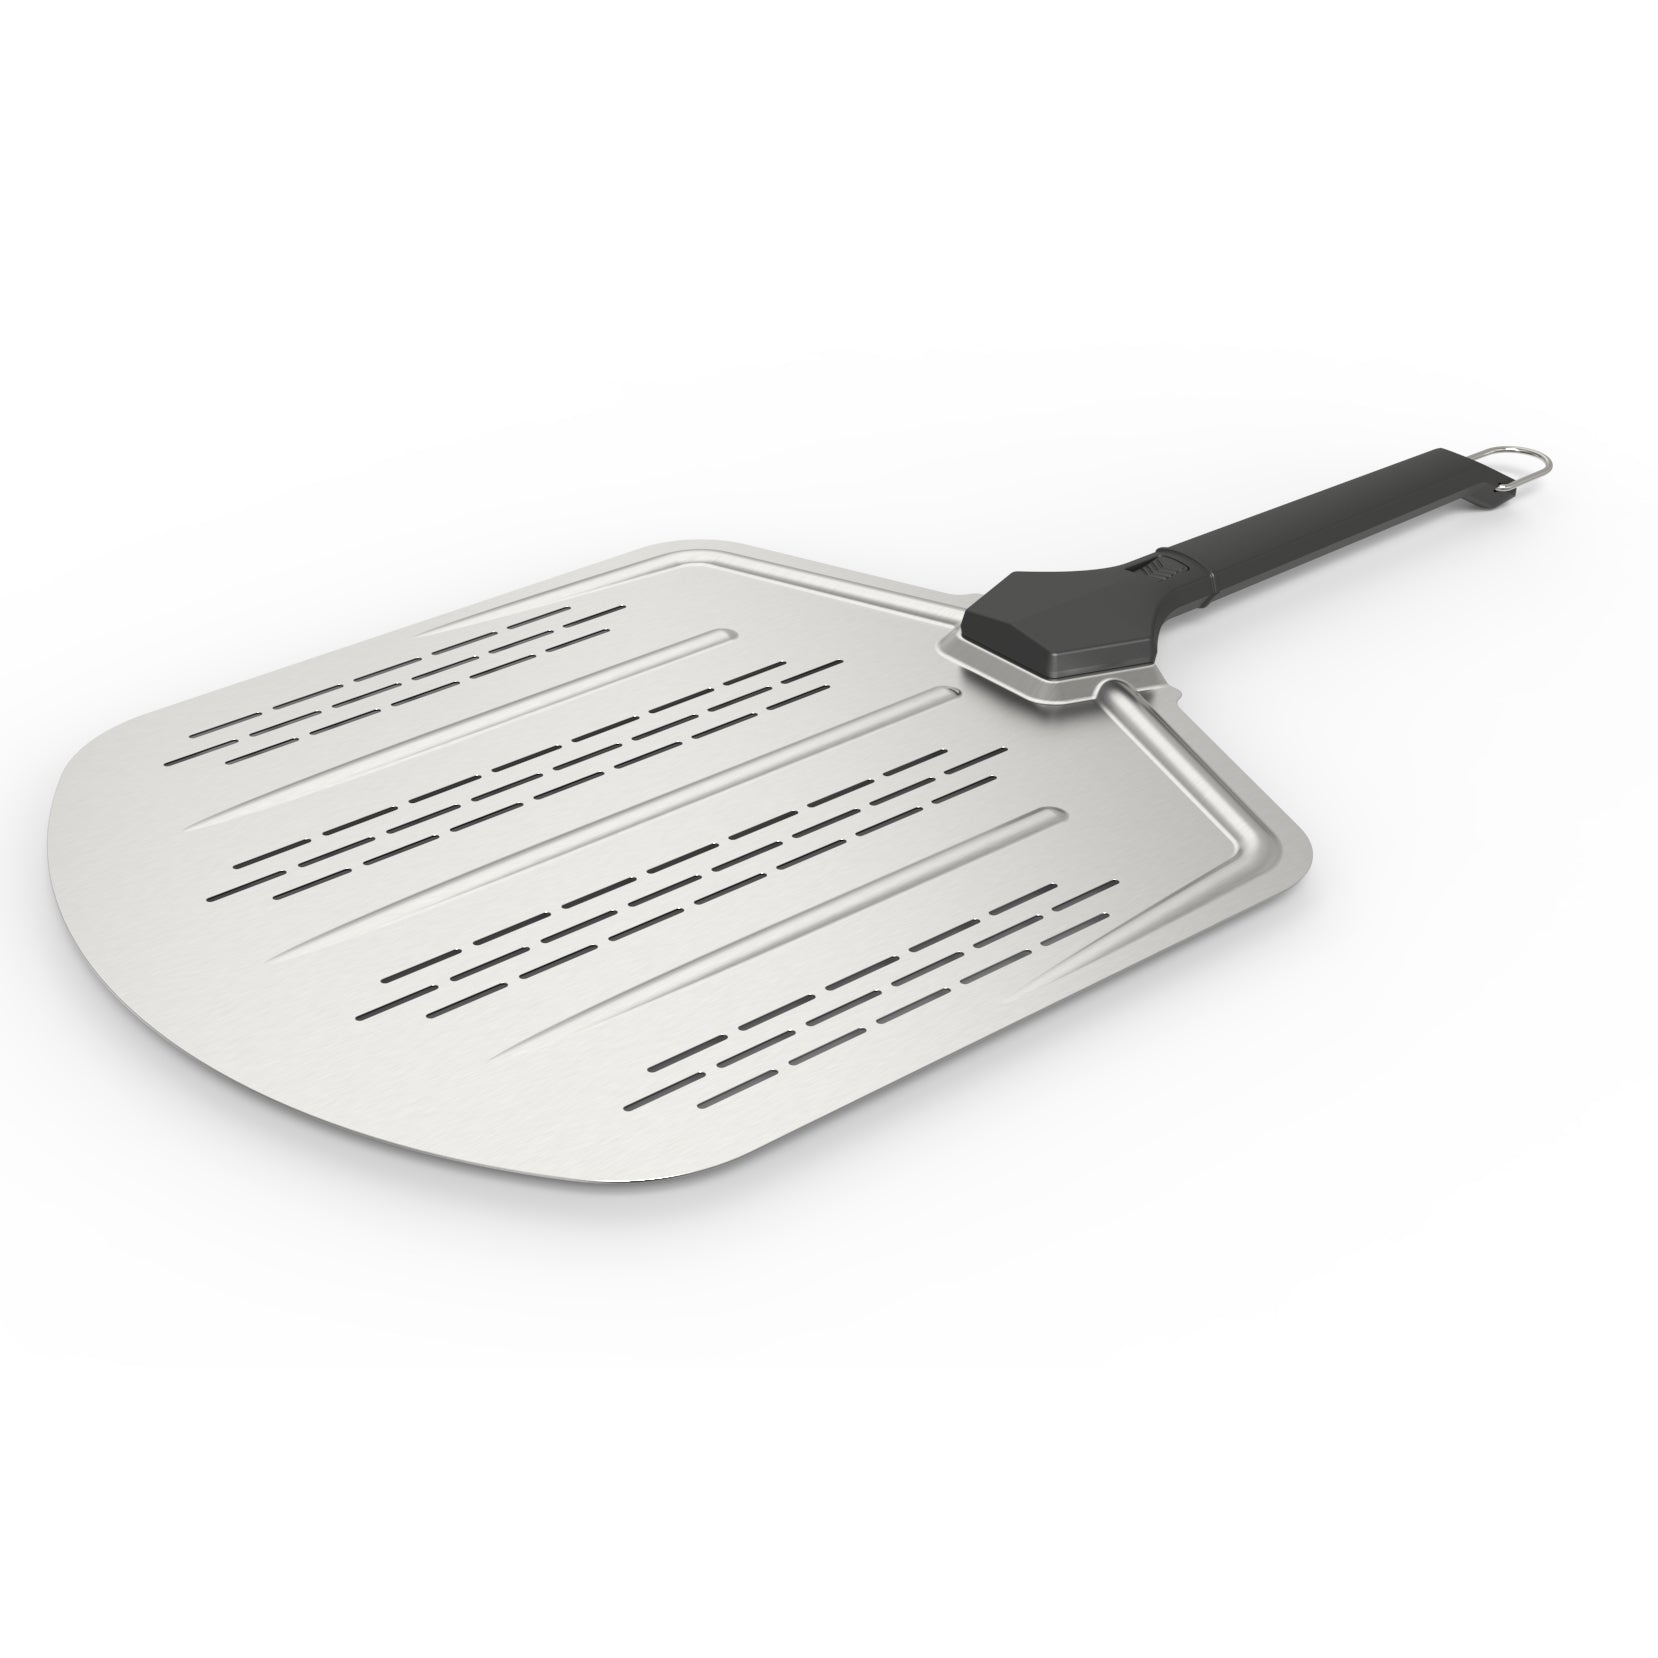 Removable Handle Perforated Pizza Pan, Detachable Handle With